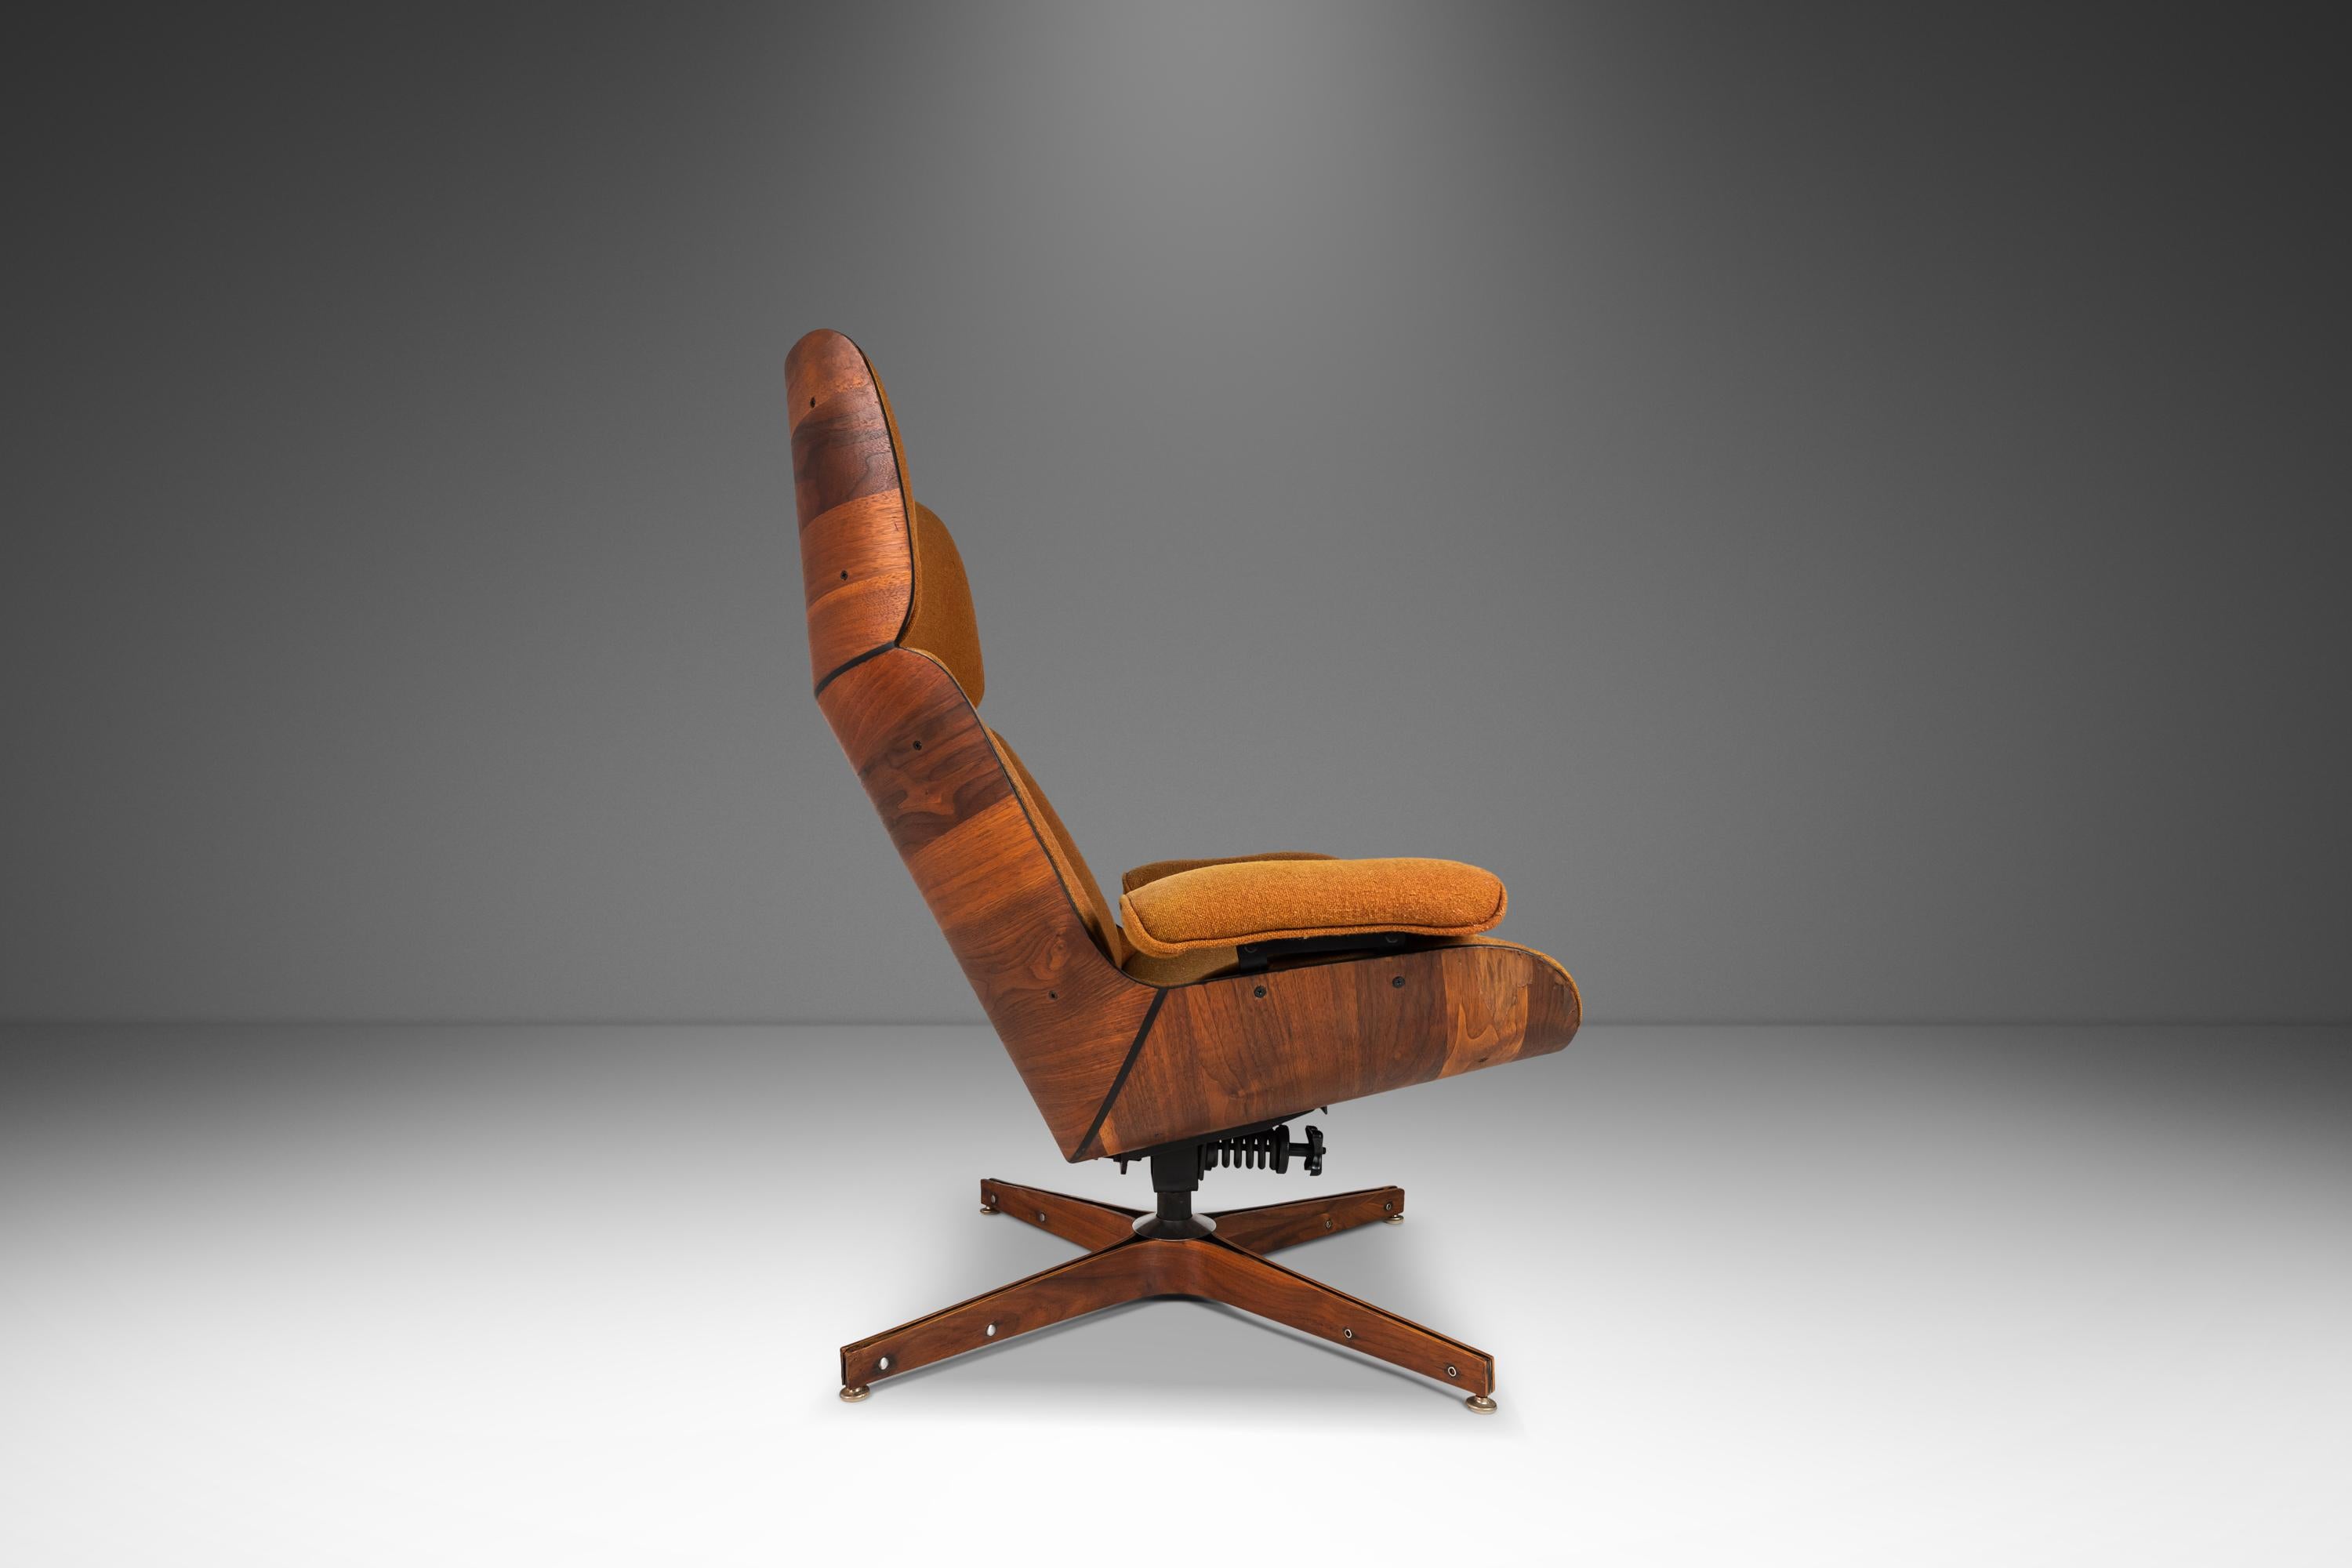 Abalone Mr. Chair Lounge Chair & Ottoman by George Mulhauser for Plycraft, USA, c. 1960s